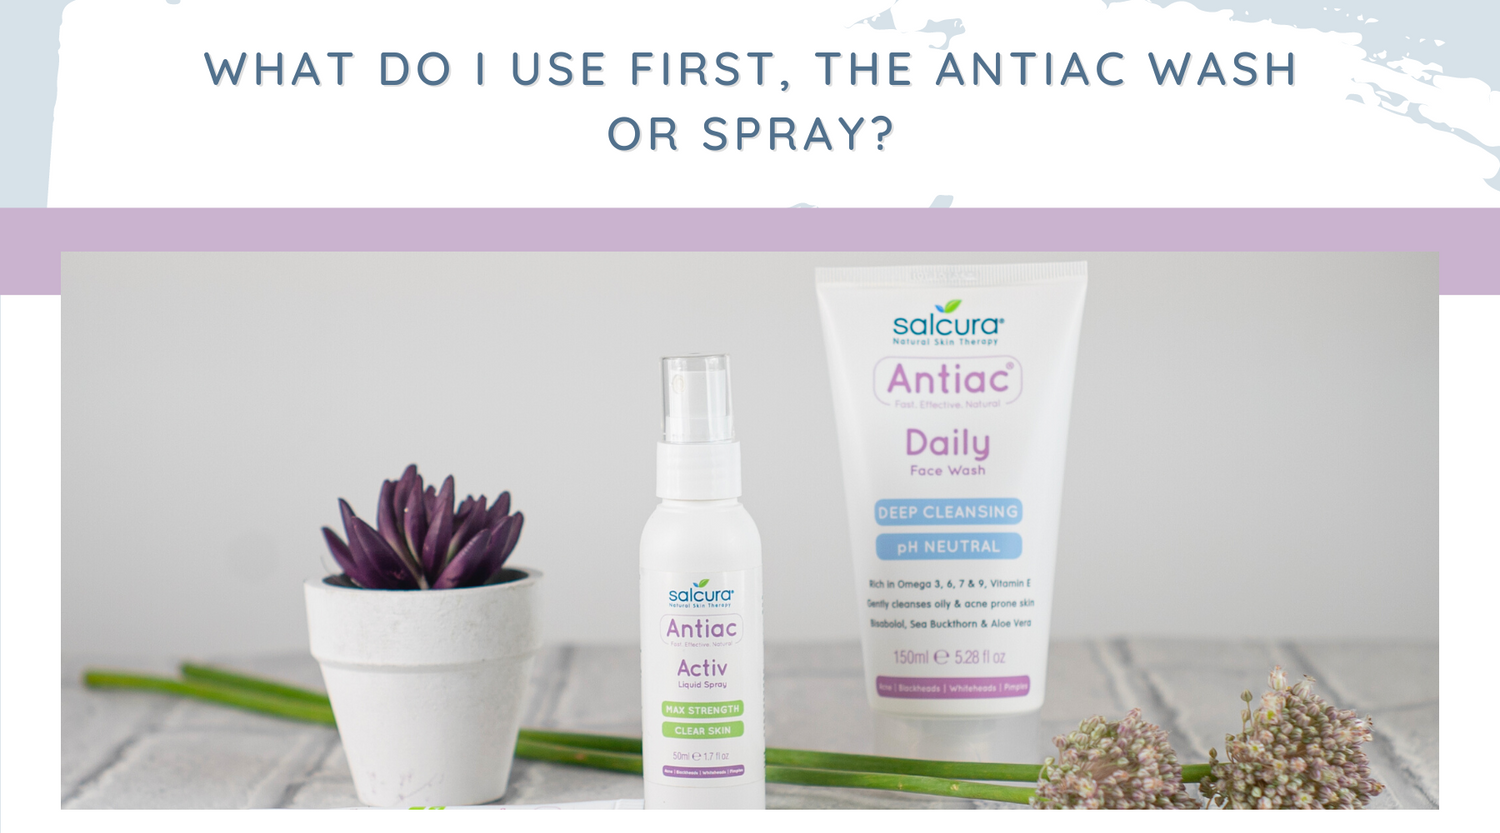 What do I use first, the Antiac wash or Spray?